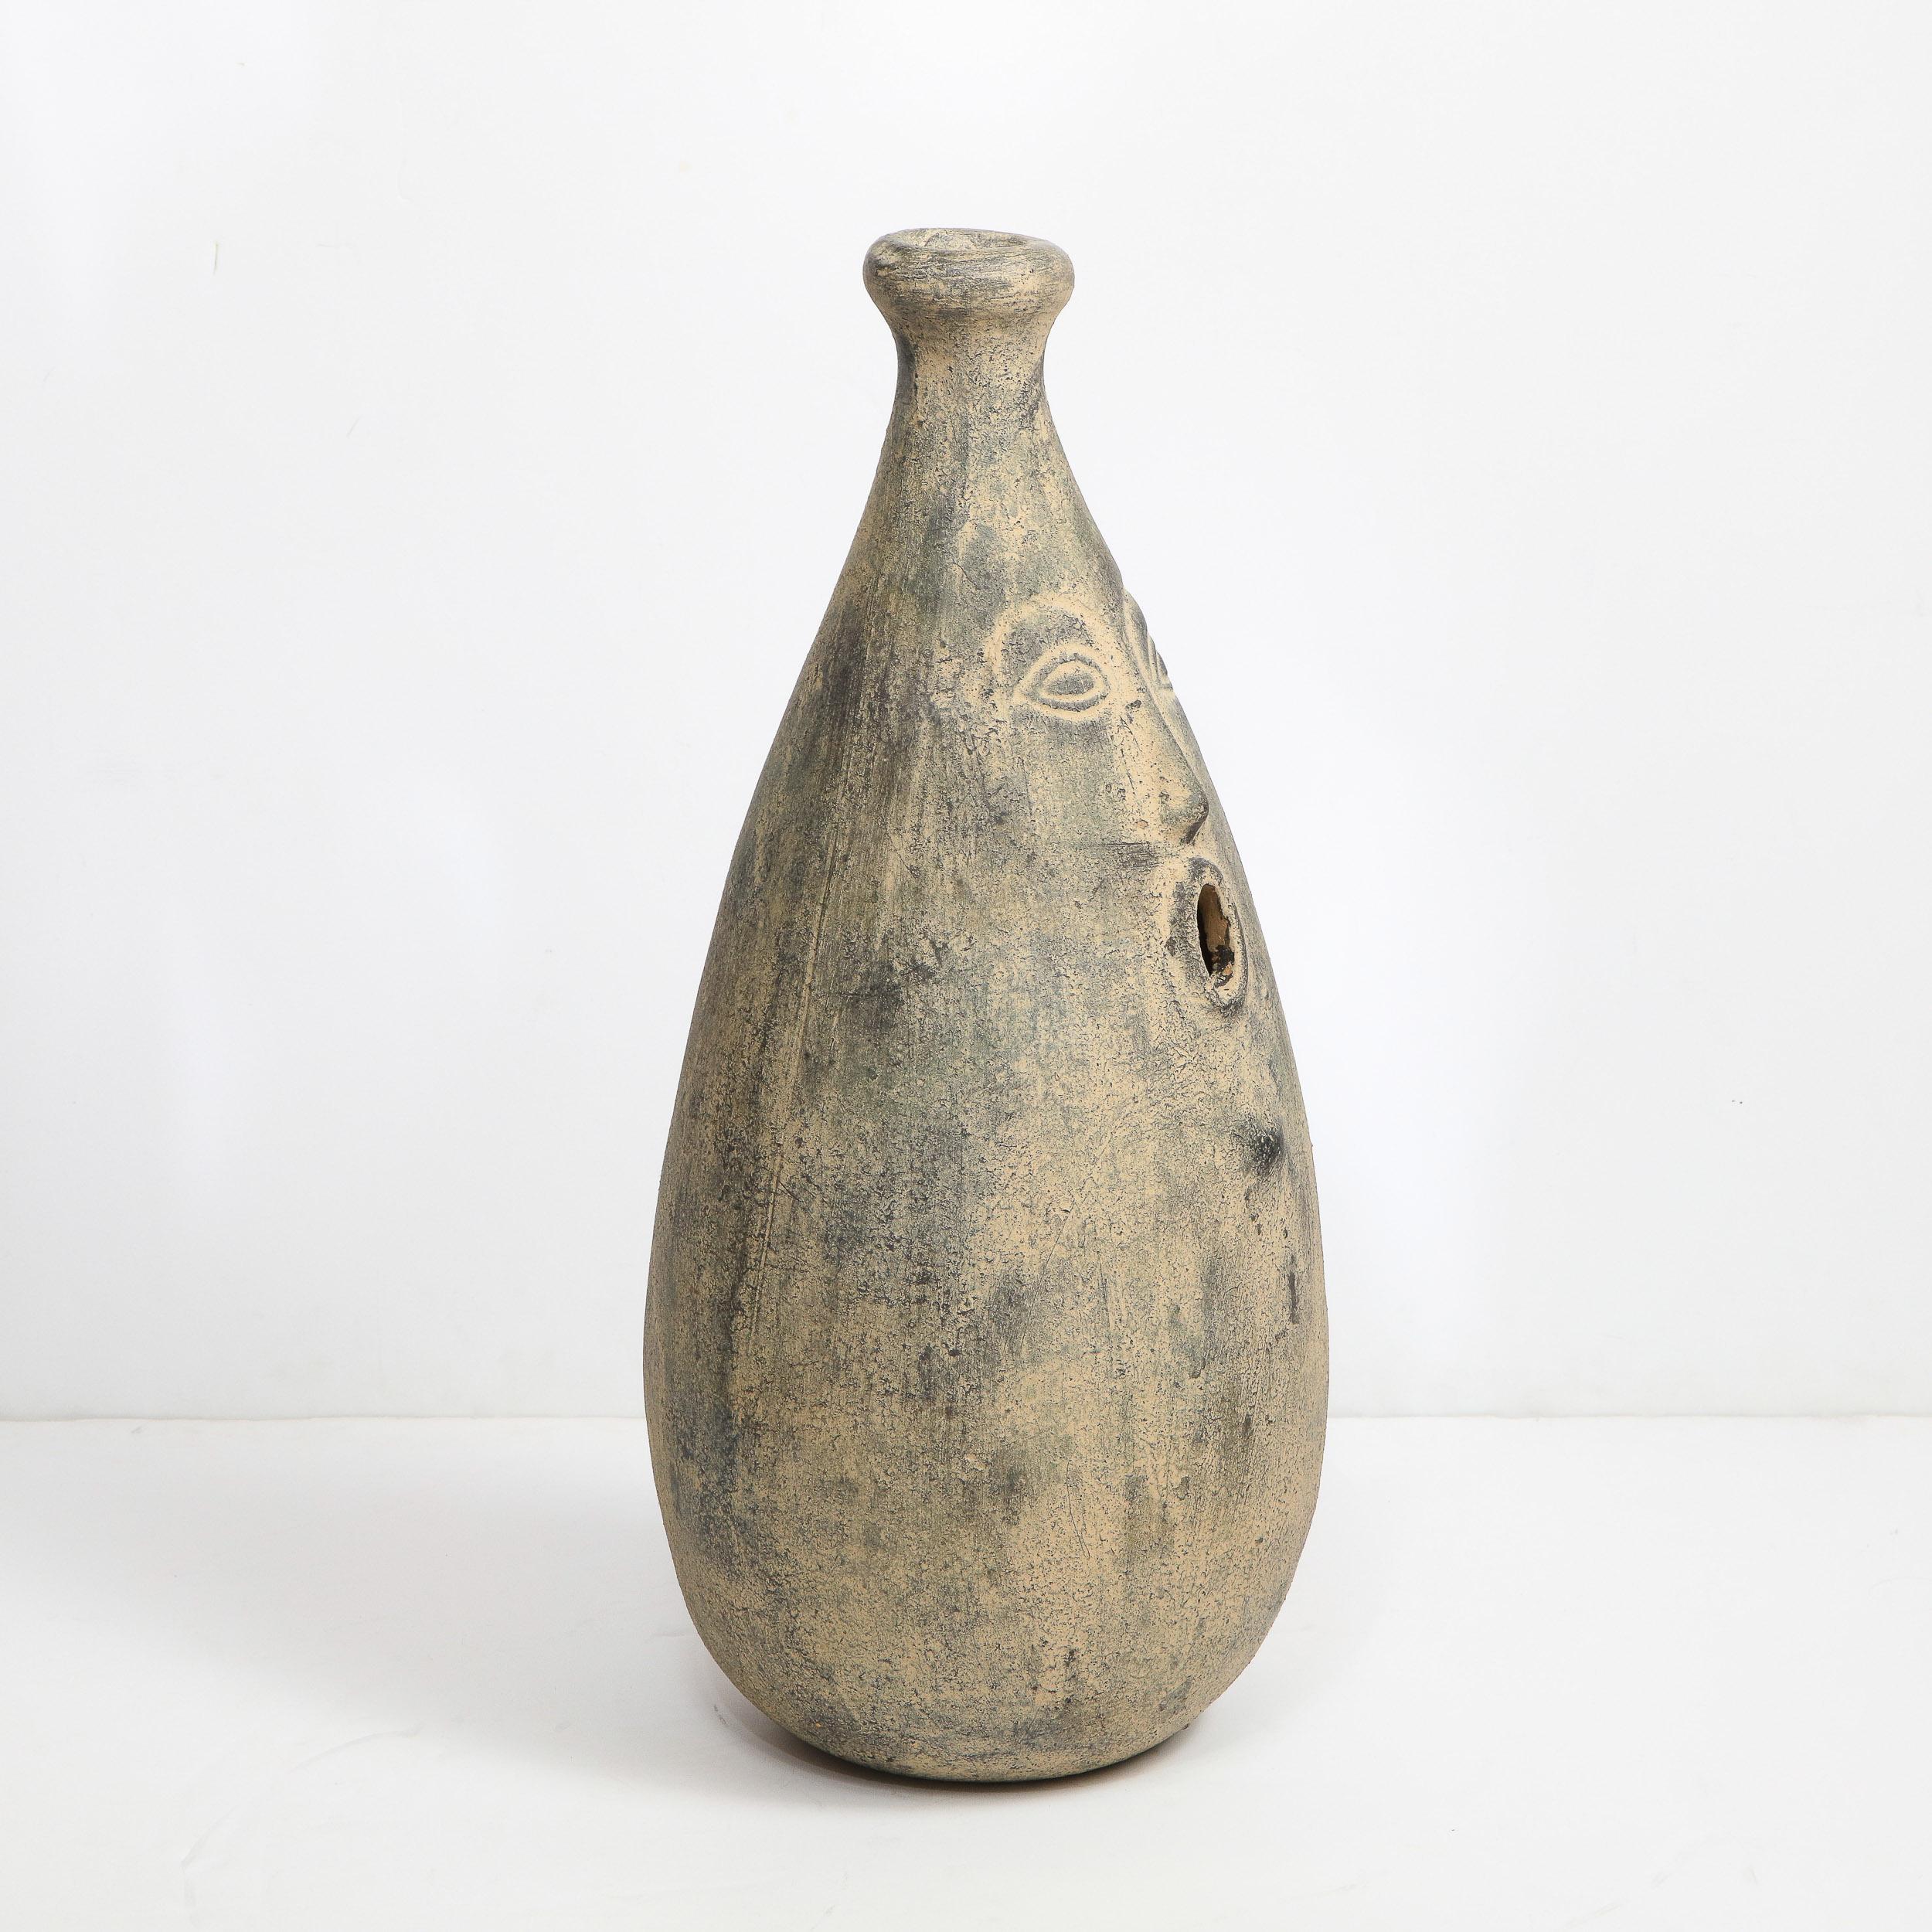 This sophisticated Mid-Century Modern large scale figurative vase was realized in the United States, circa 1960. Created in ceramic, the piece offers a stylized human face with its distinguishing feature reduced to abstracted forms, in the manner of